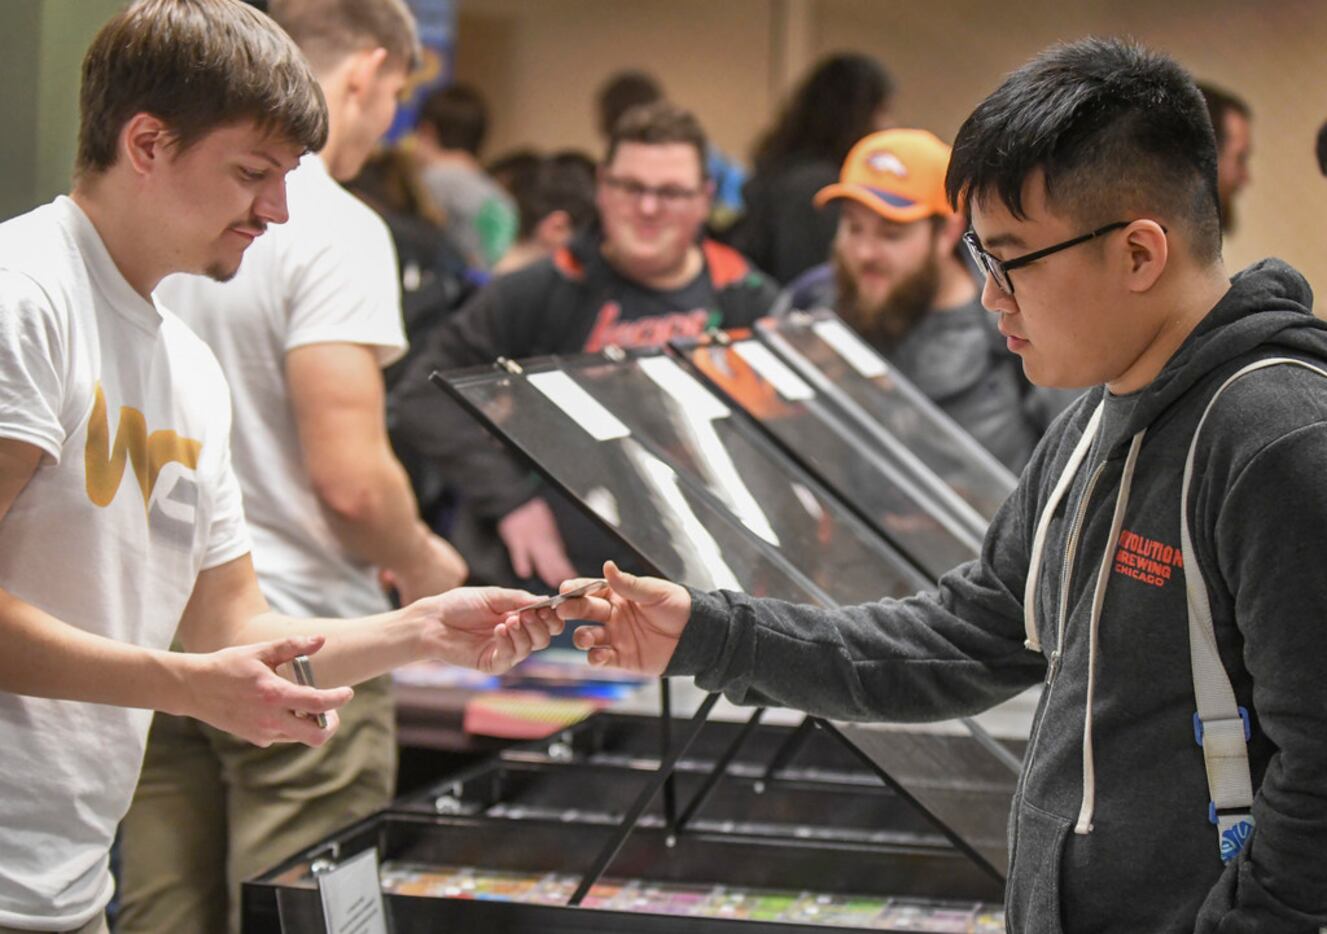 David Yoon (right) flew in from Chicago to compete in the Pokemon Regional Championships.